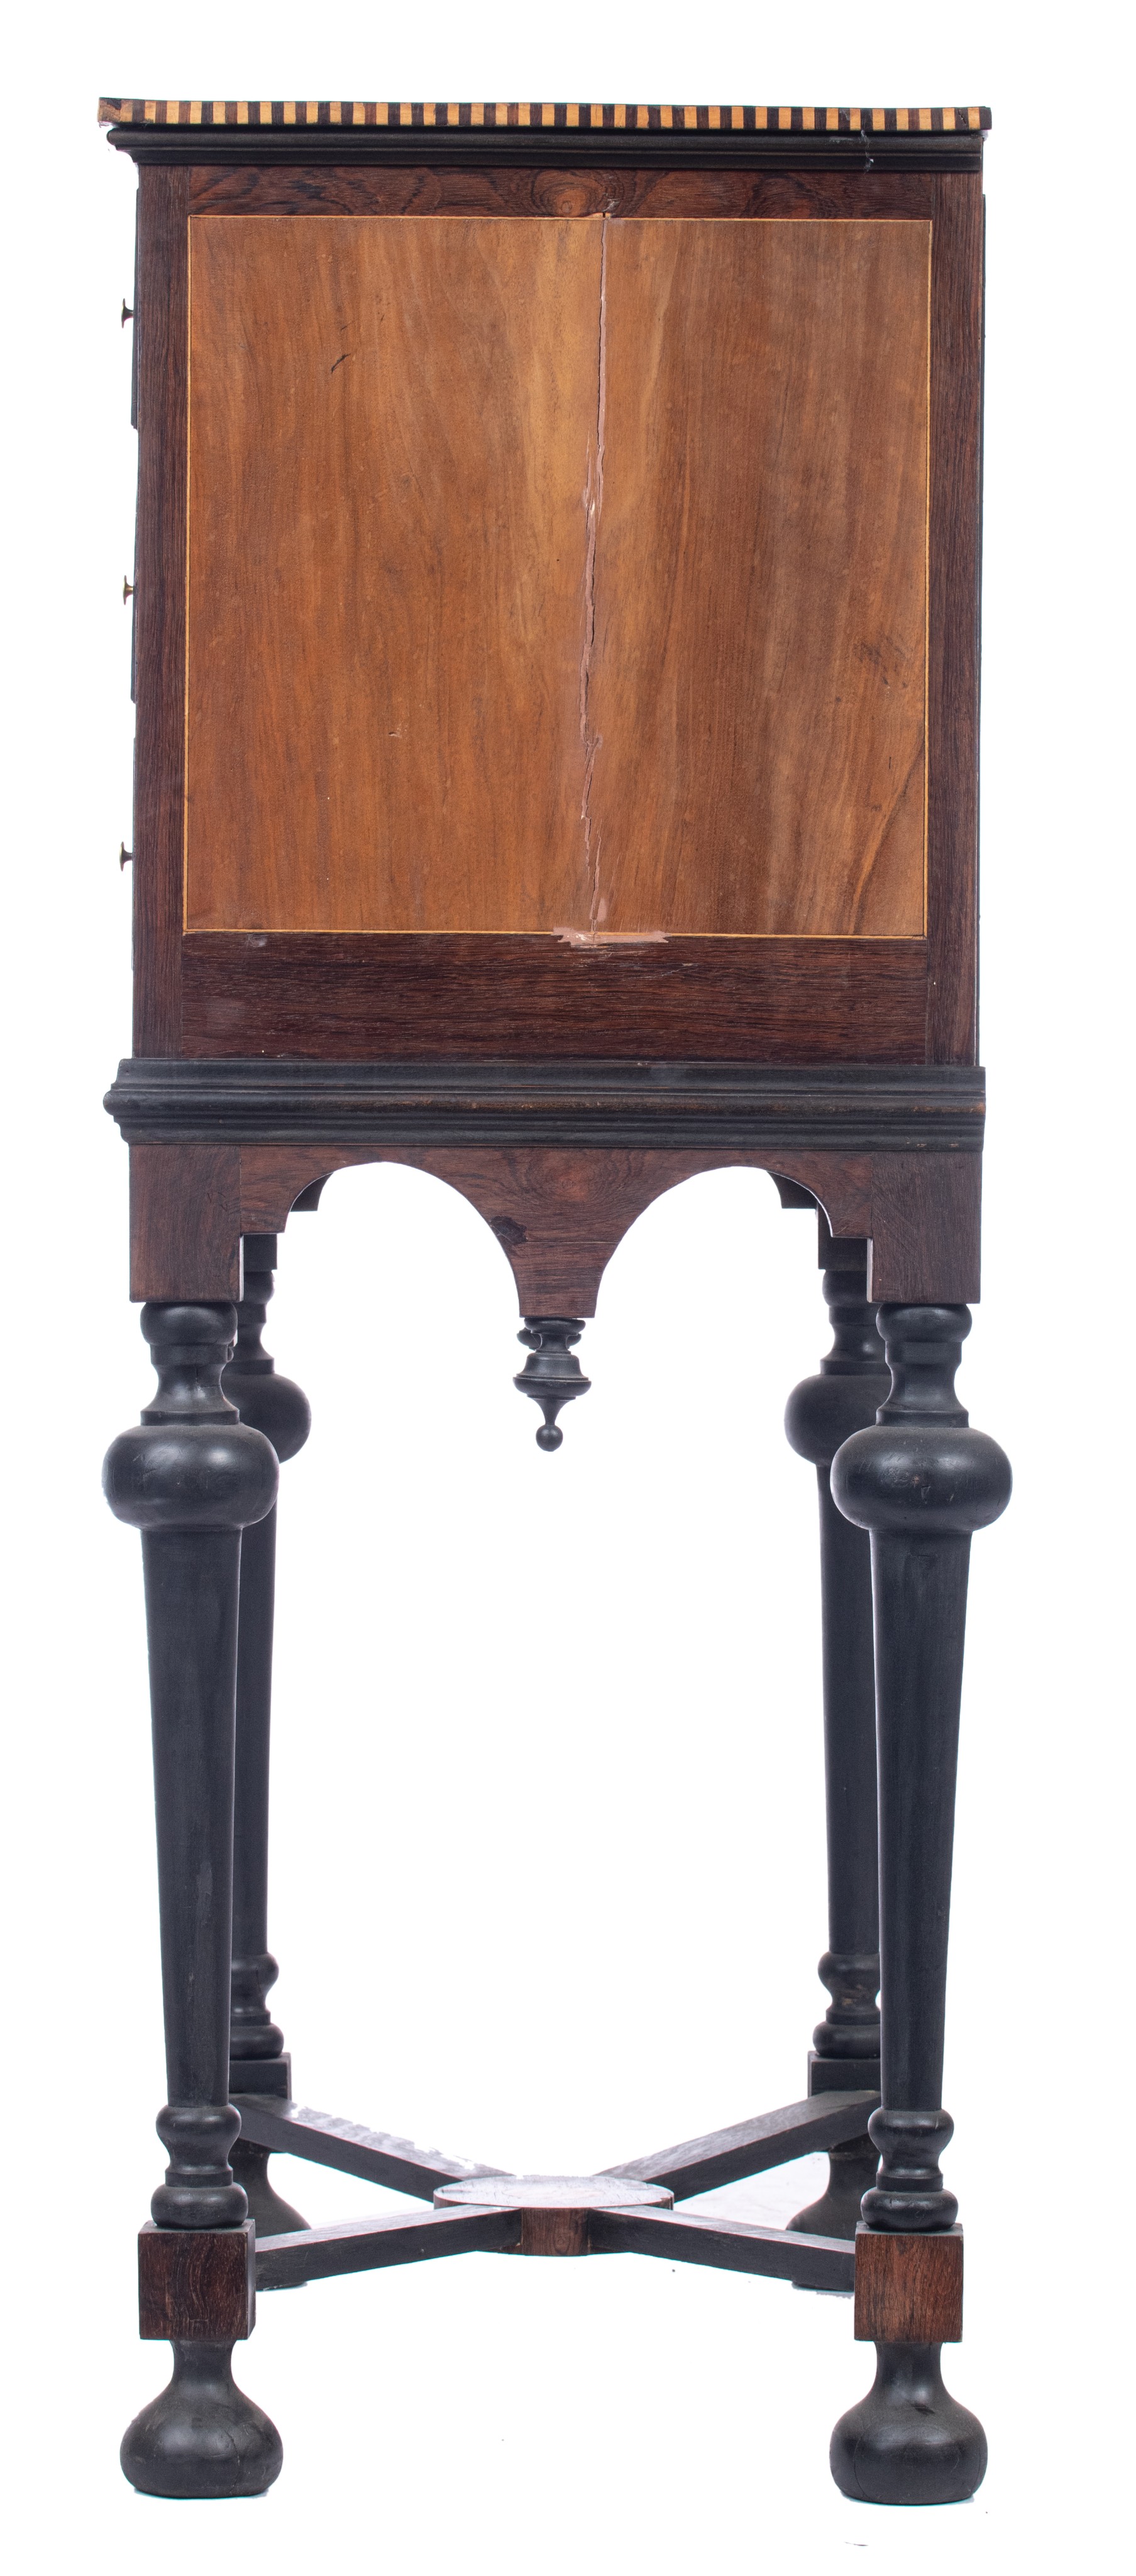 A fine Neoclassical cabinet on stand, H 140 - W 88 - D 52 cm - Image 3 of 12